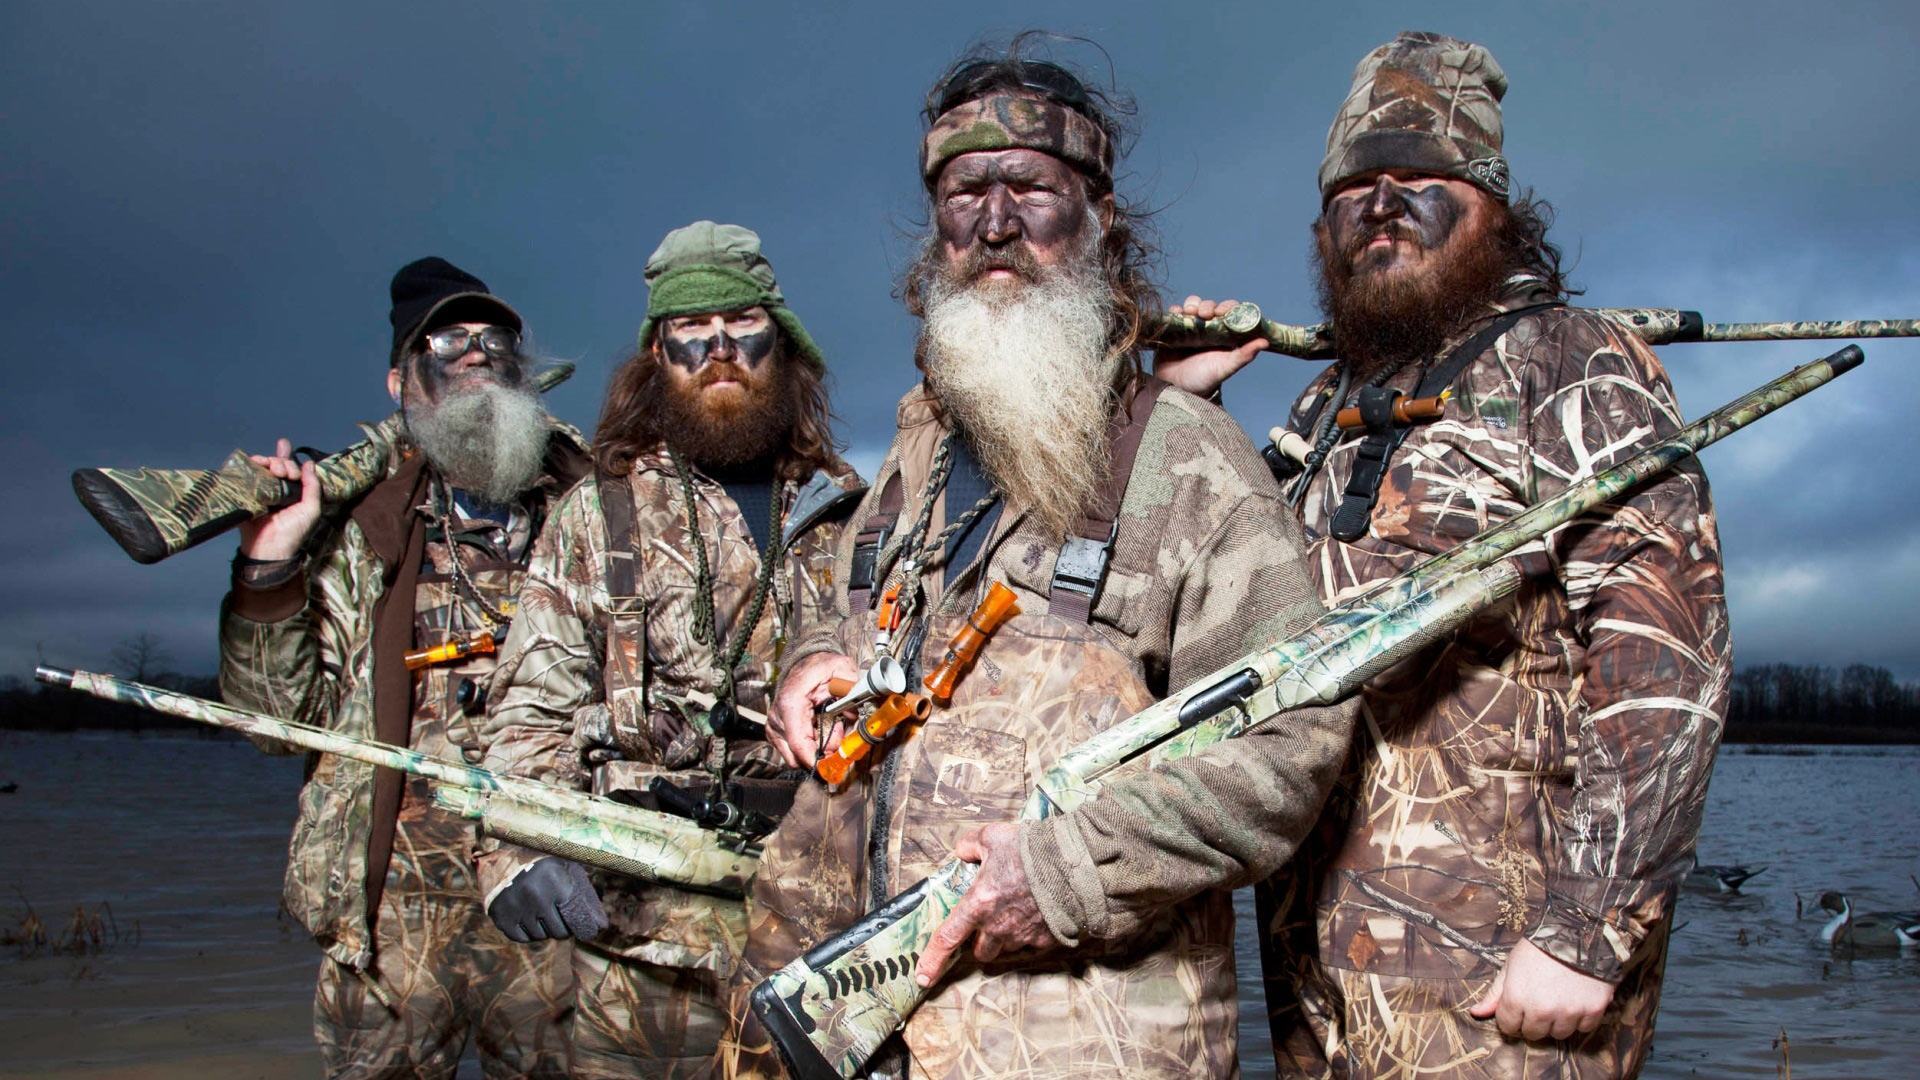 The cast of Duck Dynasty is posing together in camo and holding guns.